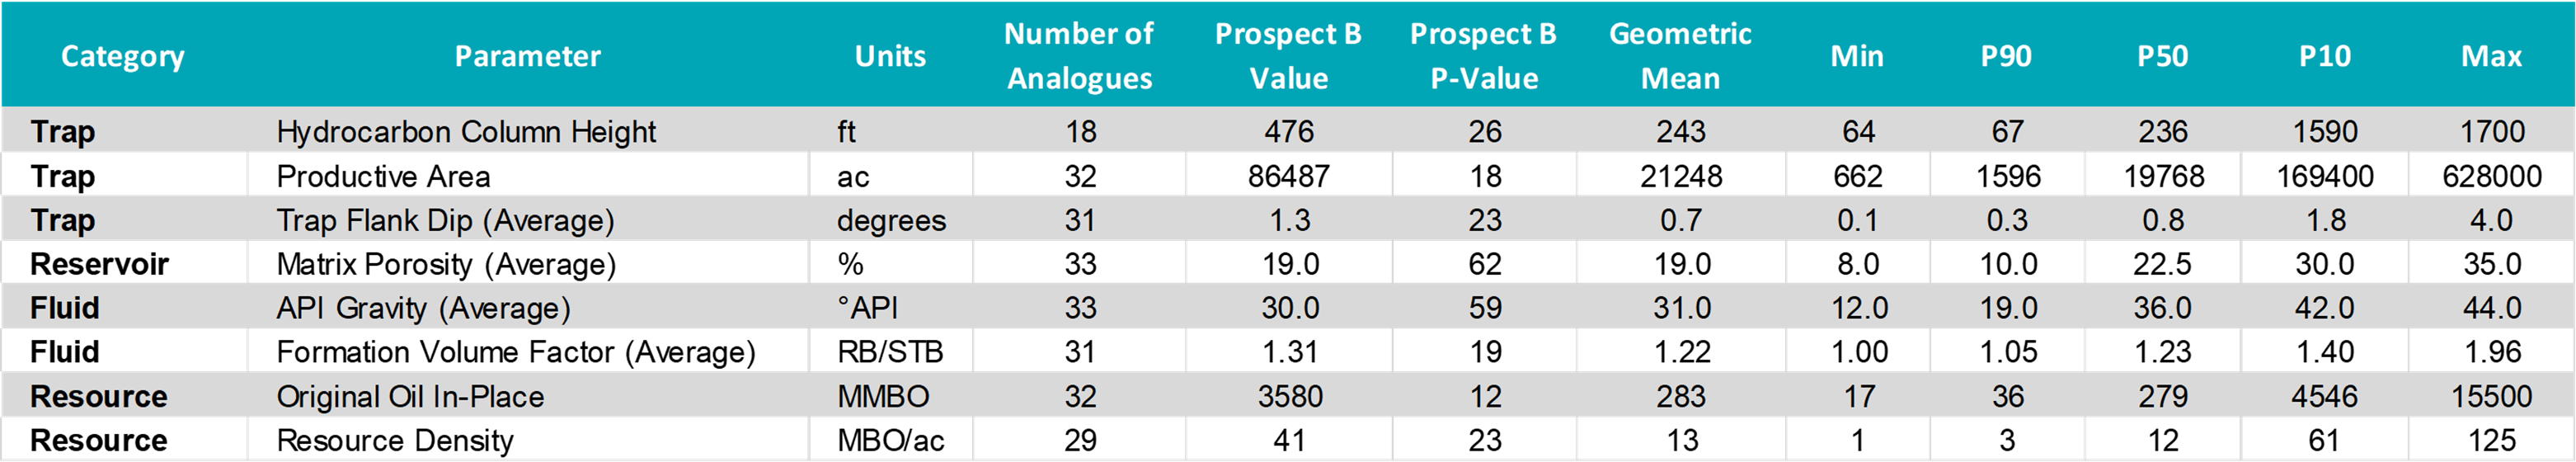 Table 3 - Key numeric parameter values of Prospect B against probabilistic distribution of 90% to 10% range of analogues. Abbreviations: RB/STB = reservoir barrel/stock tank barrel; MMBO = million barrels of oil; MBO = thousand barrels of oil; P-Value = statistic position of benchmark target against probabilistic distribution of analogues; P10 = estimate exceeded with 10% probability; P50 = estimate exceeded with 50% probability; P90 = estimate exceeded with 90% probability.